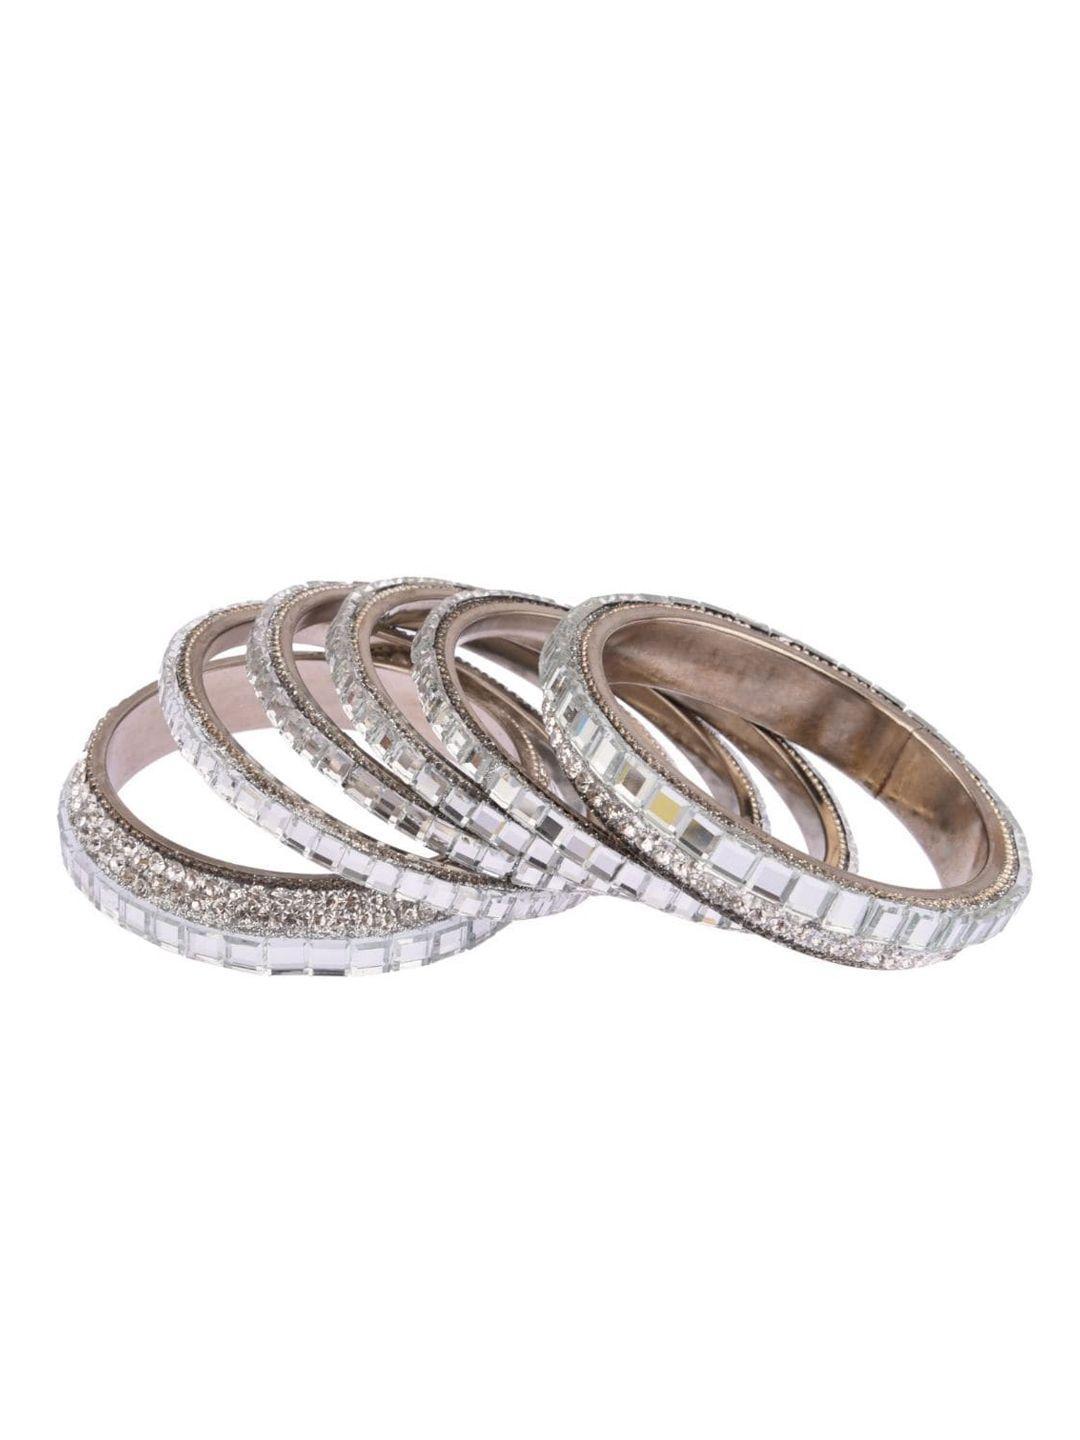 efulgenz set of 6 rhodium-plated silver-toned & brown crystals & cz studded bangles